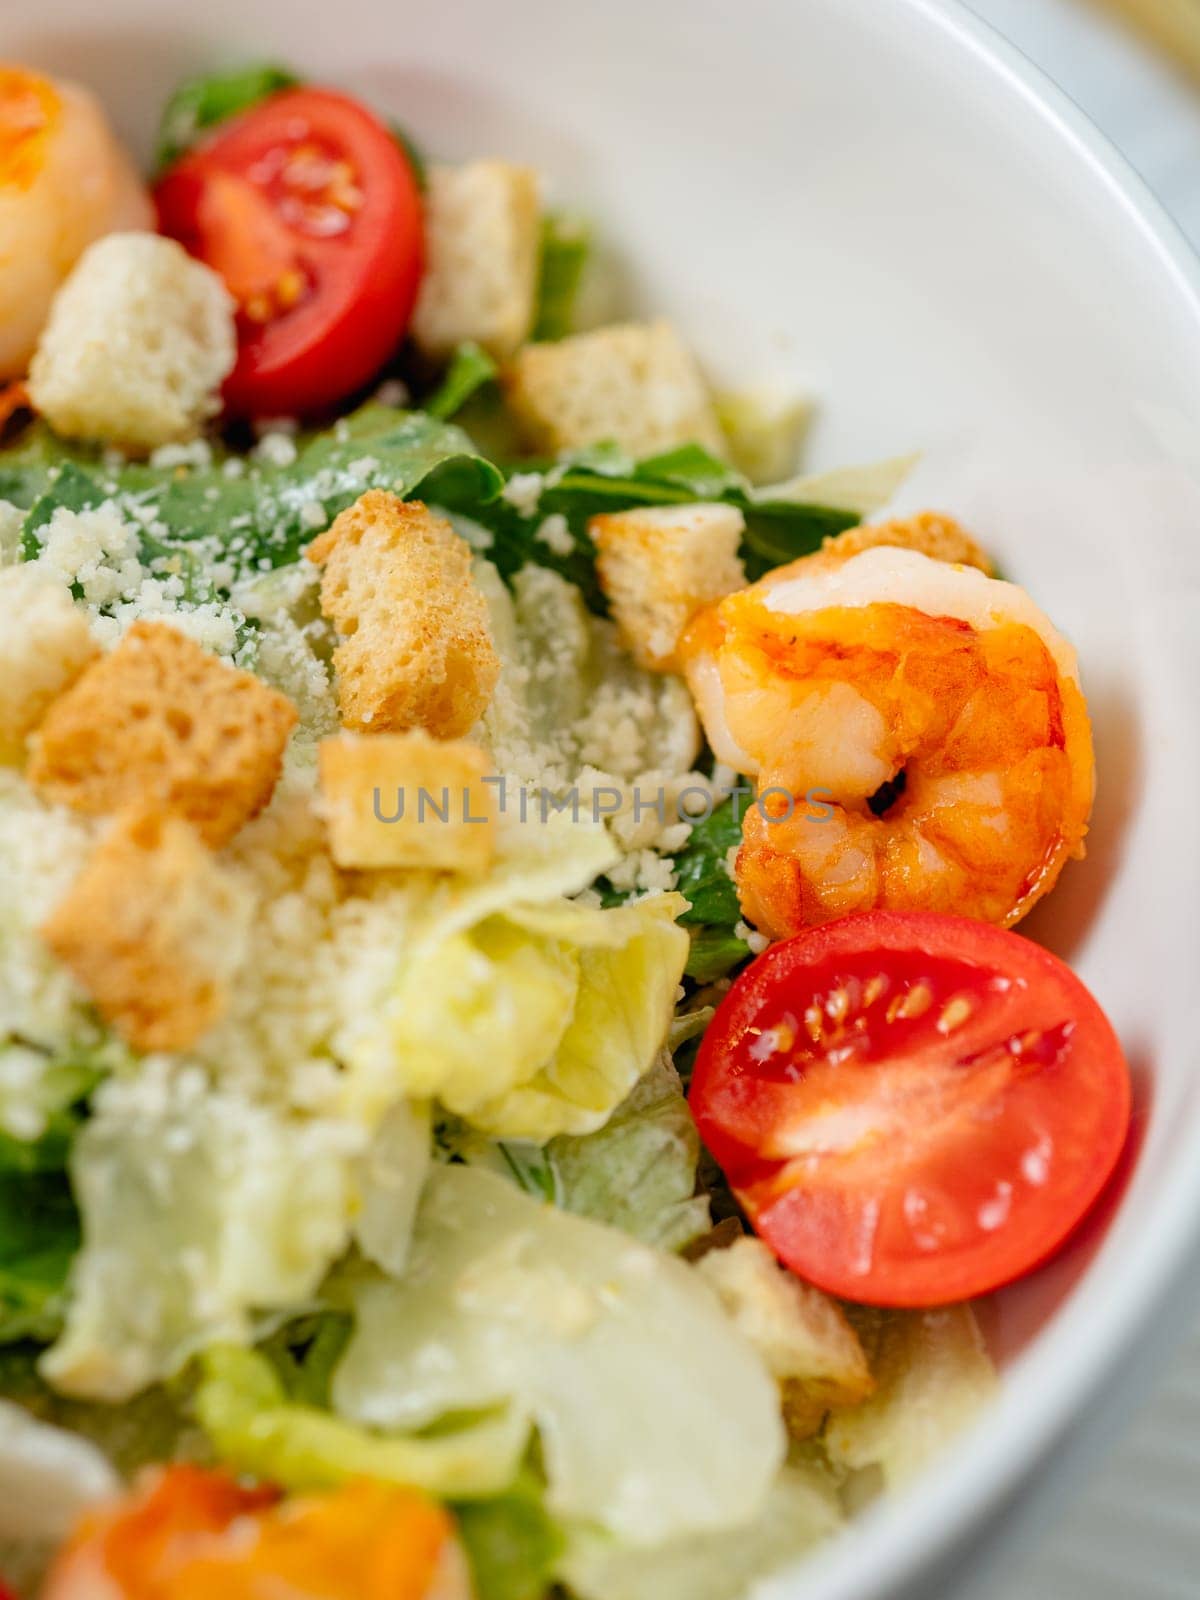 Caesar salad with shrimps on plate closeup view